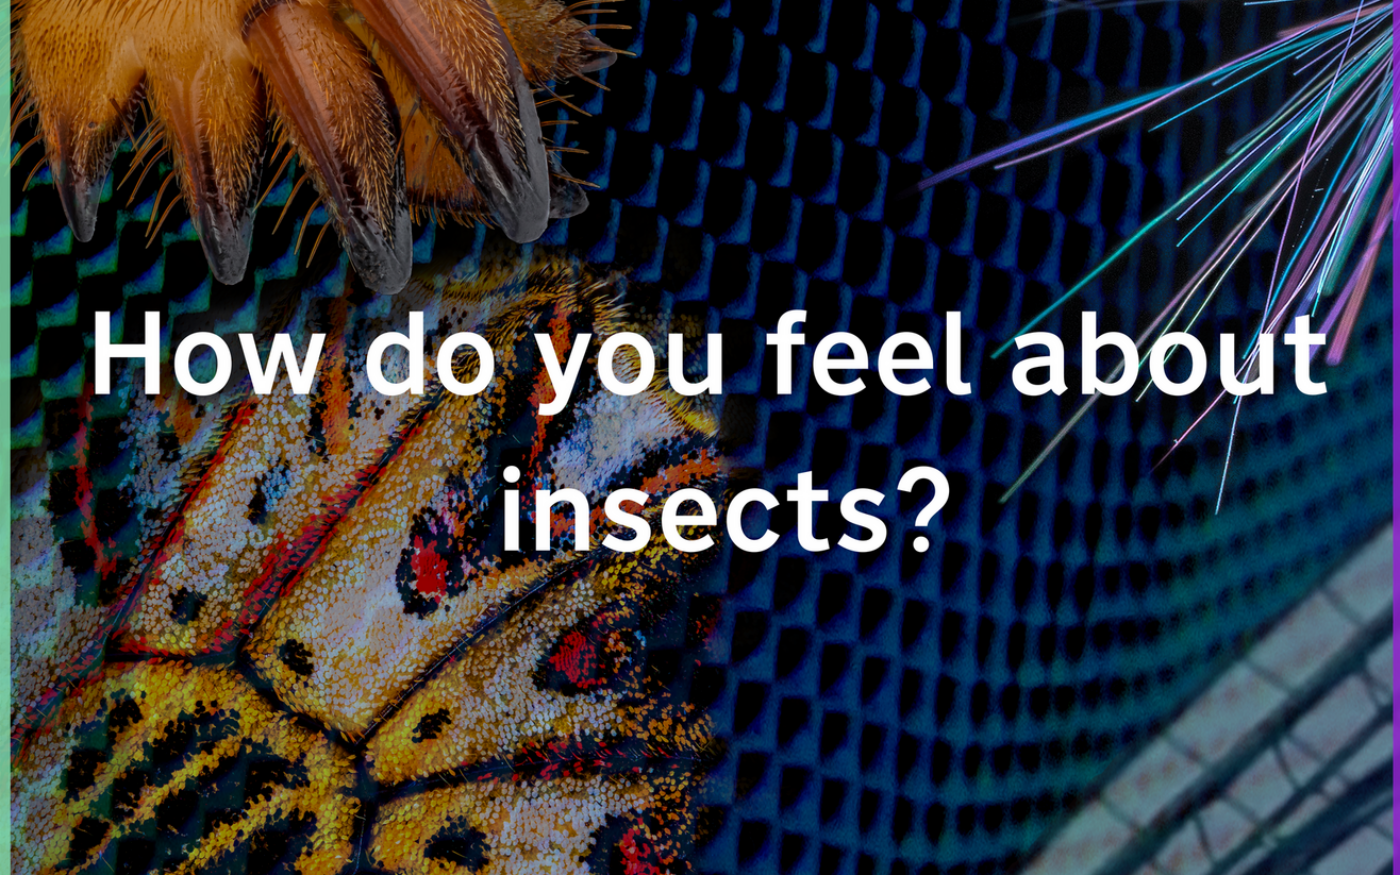 How do you feel about insects? event promotion image